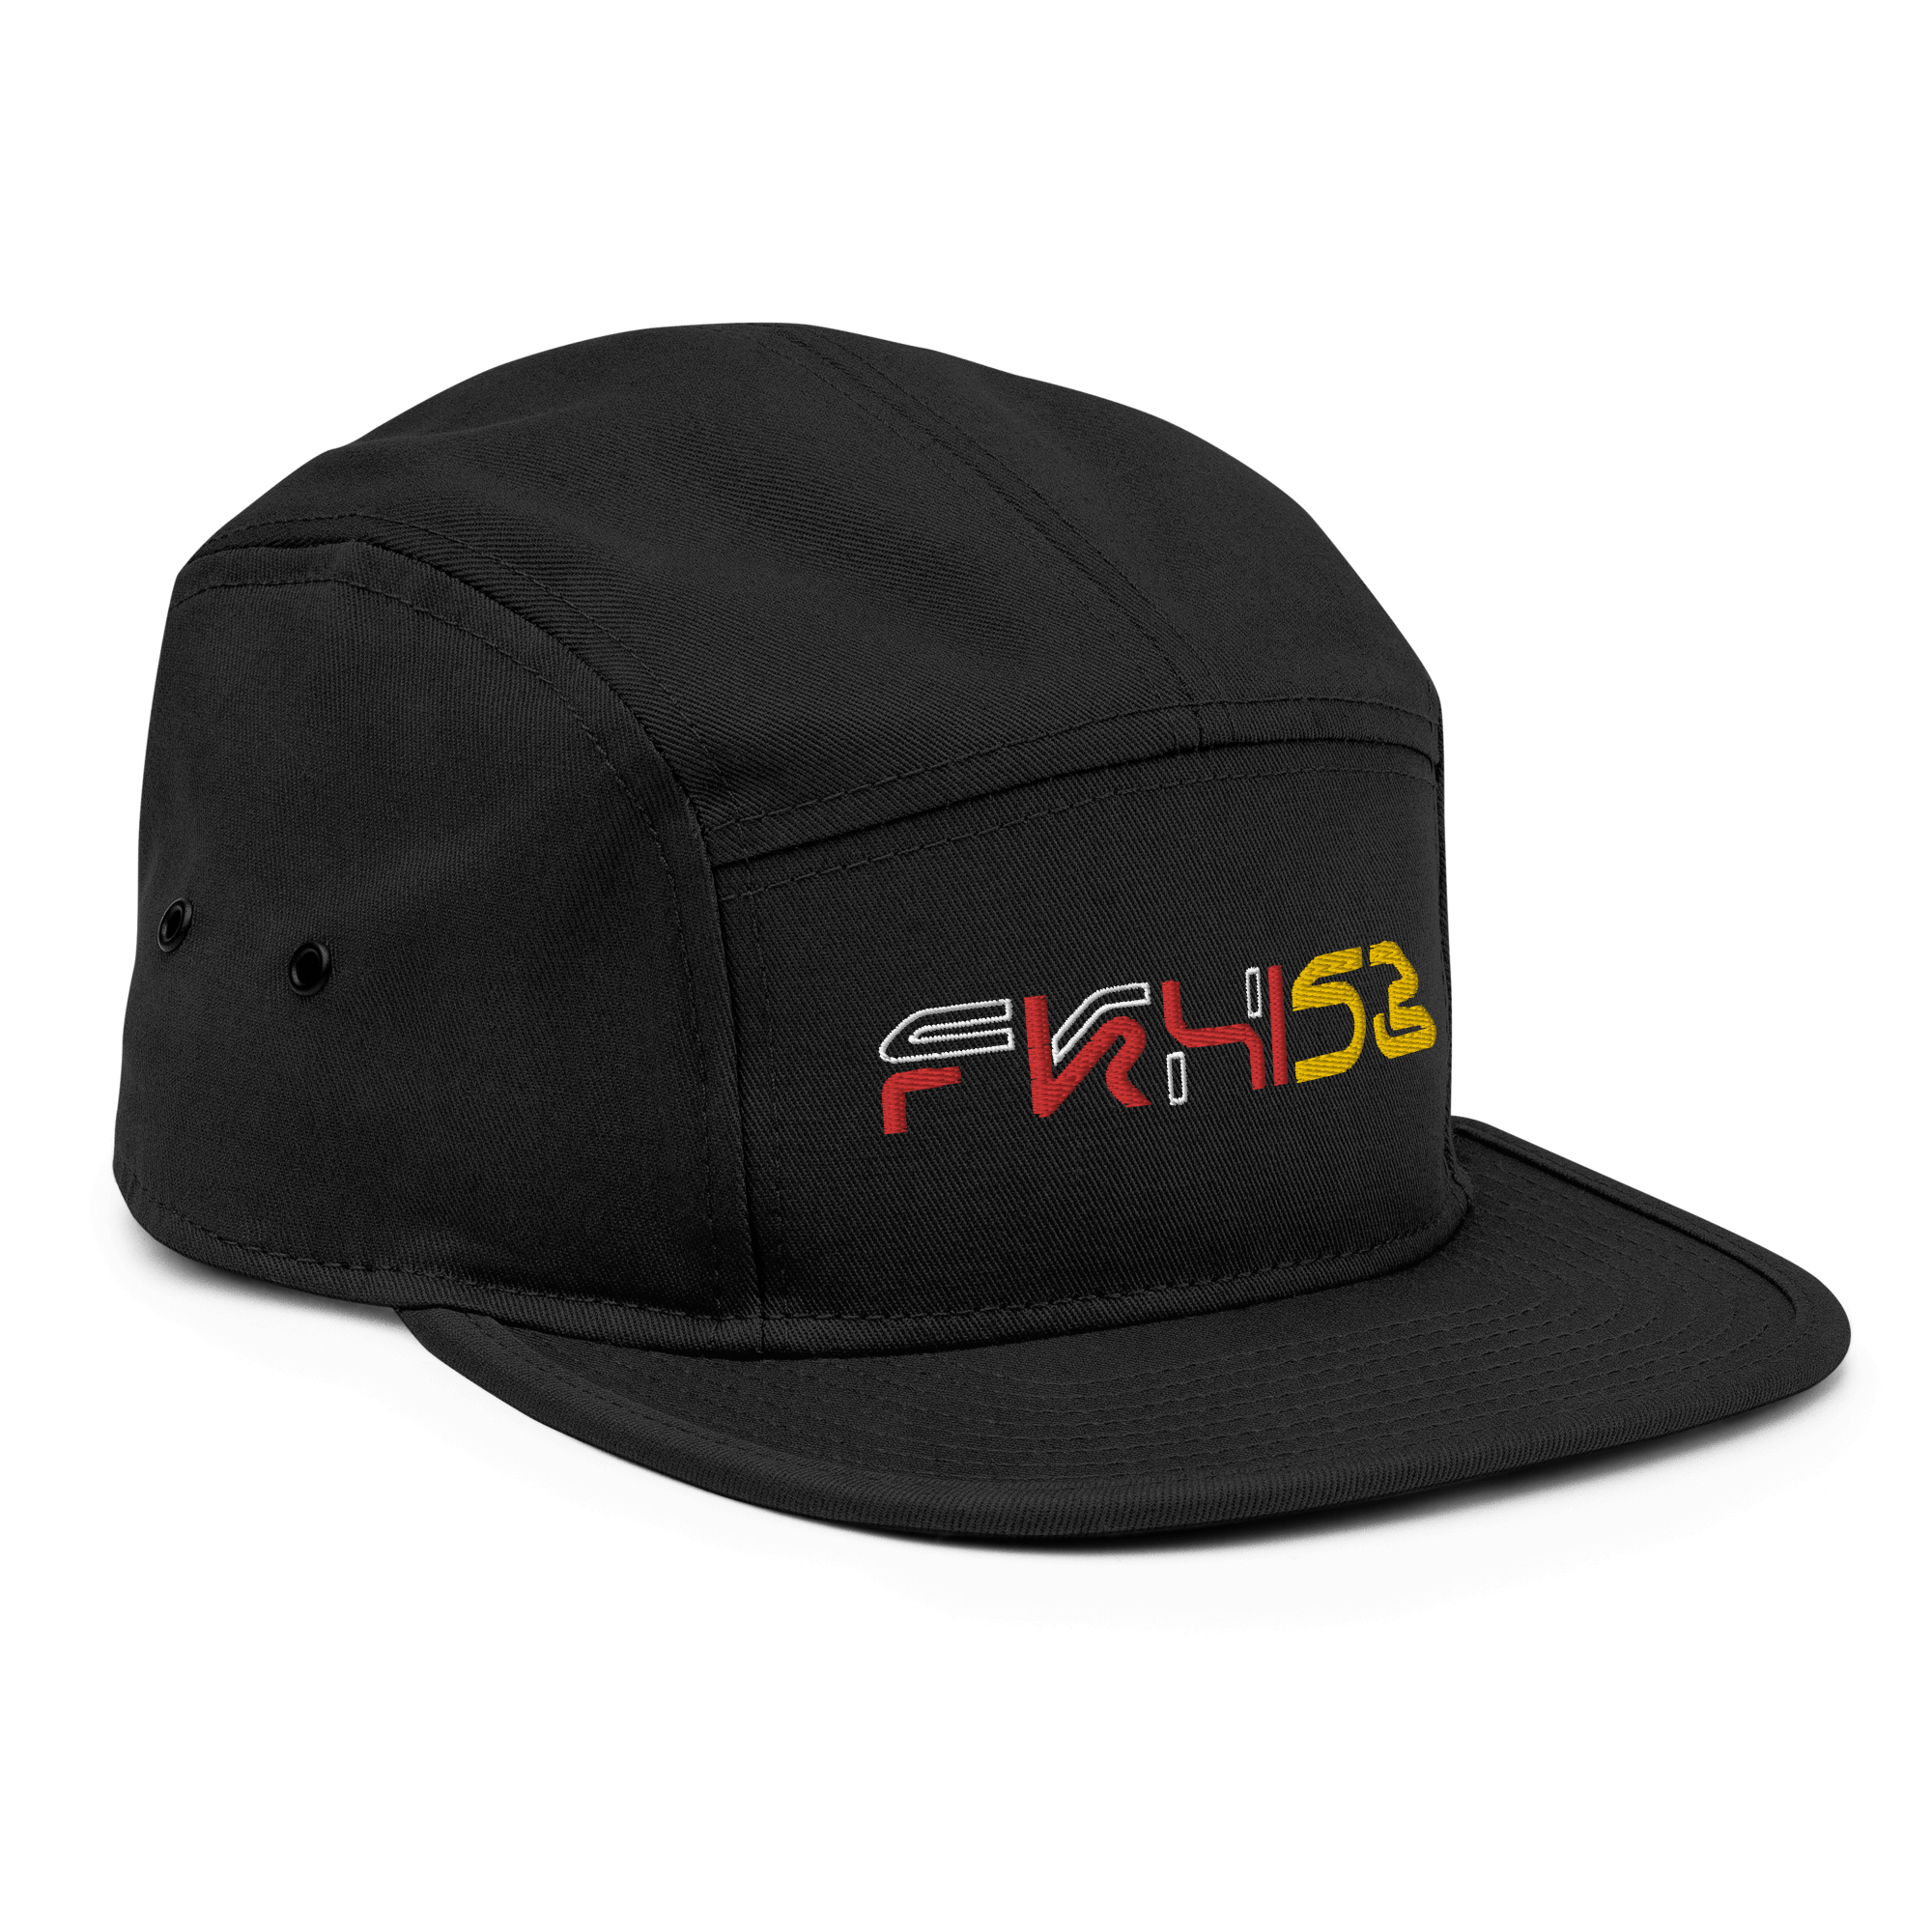 FKXI 53 Camper CapDive into the future with FKXI 53's Futuristic 3D Embroidered Cap – a structured camper style with a firm front panel for a bold, modern look. Crafted just for you upon order, this cap may take a bit longer to reach you, but the wait is